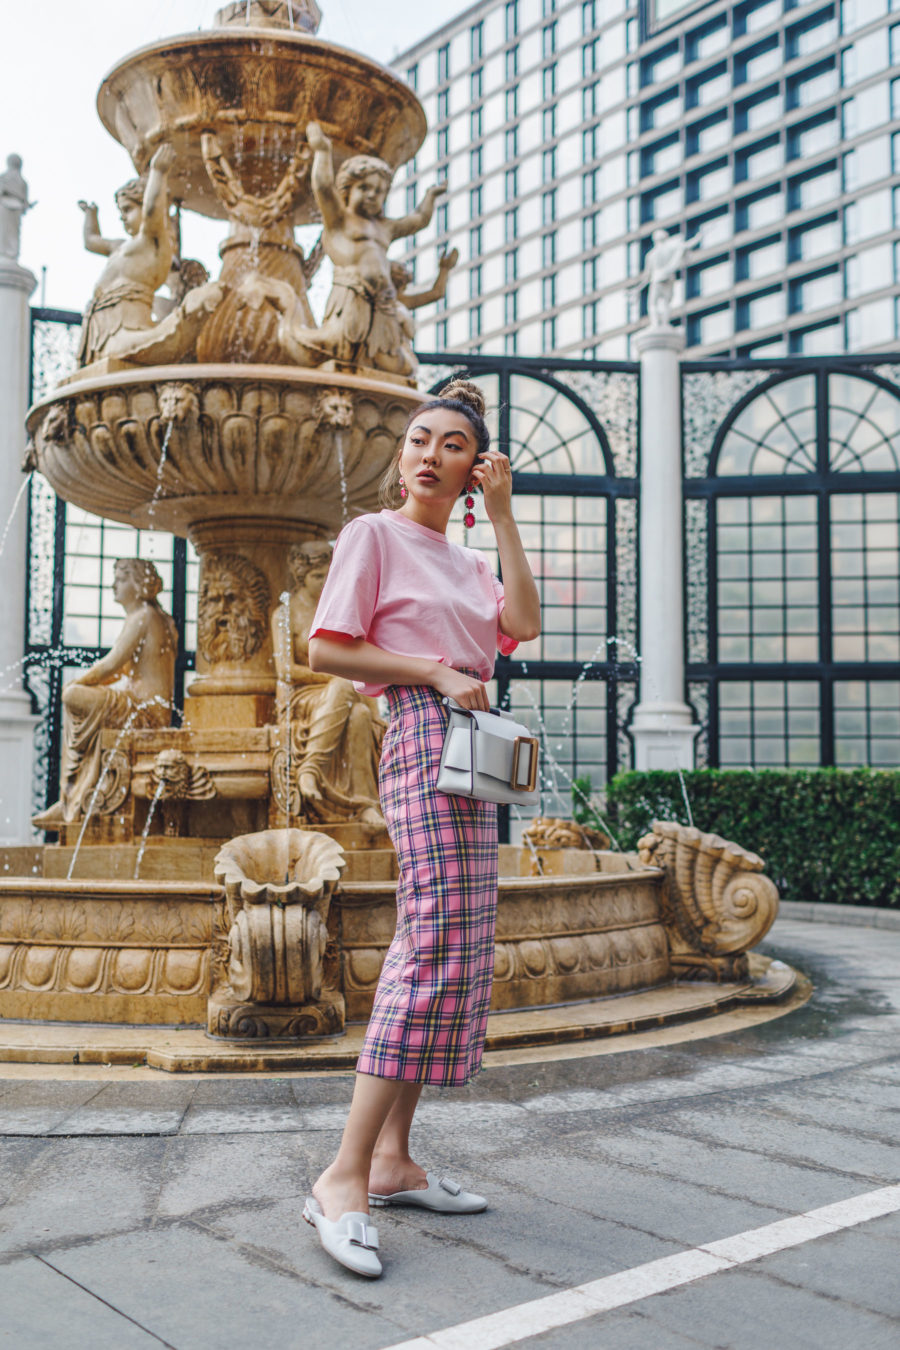 5 Best Colors to Wear This Summer & Stand Out - Chic travel outfits, pink plaid skirt, pink monochrome outfit, summer travel outfits // Notjessfashion.com